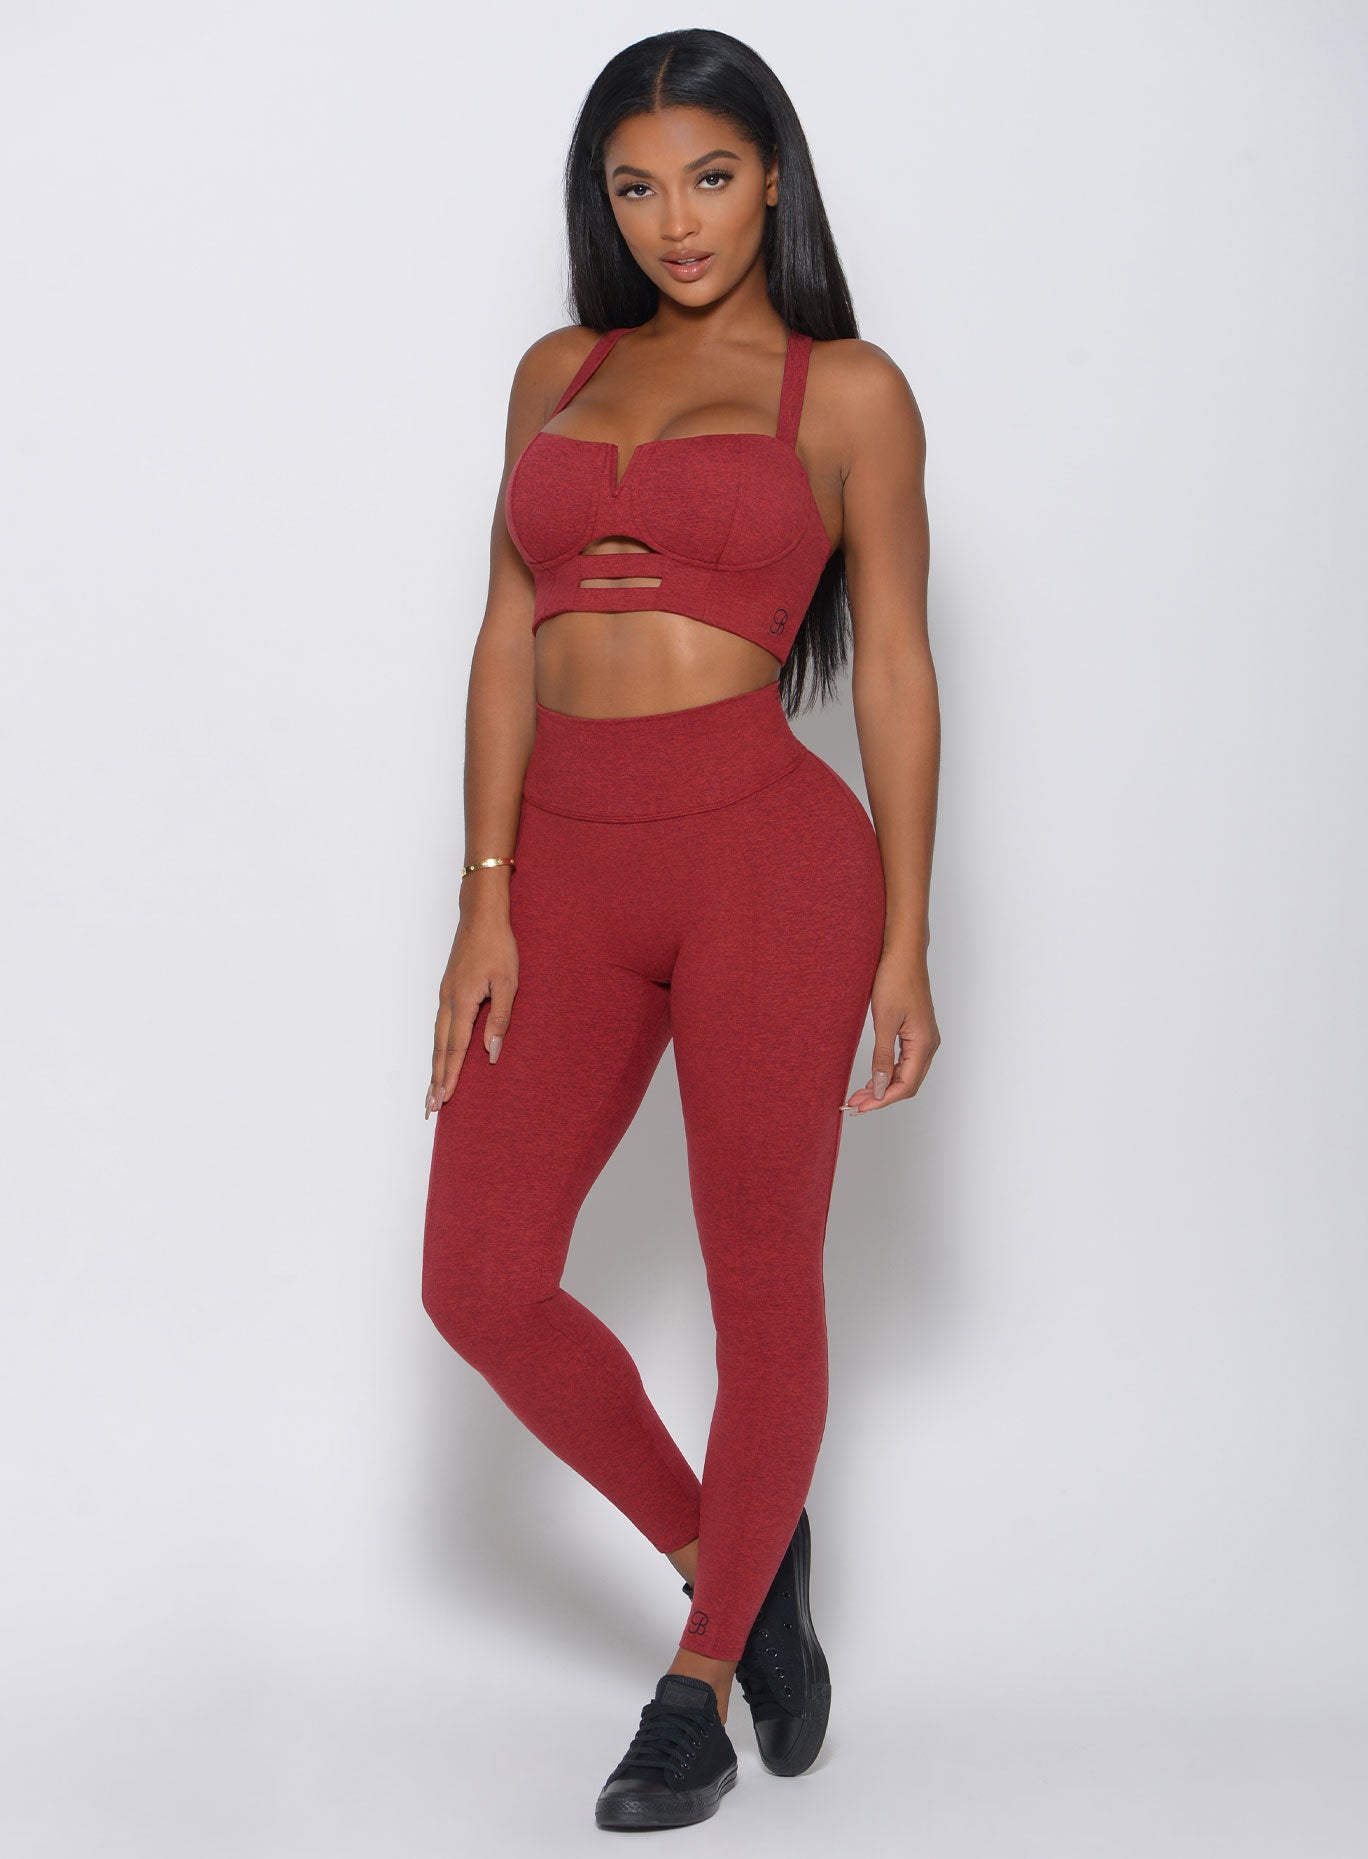 Front view of the model in a red high waist leggings with a V back design and a matching bra 